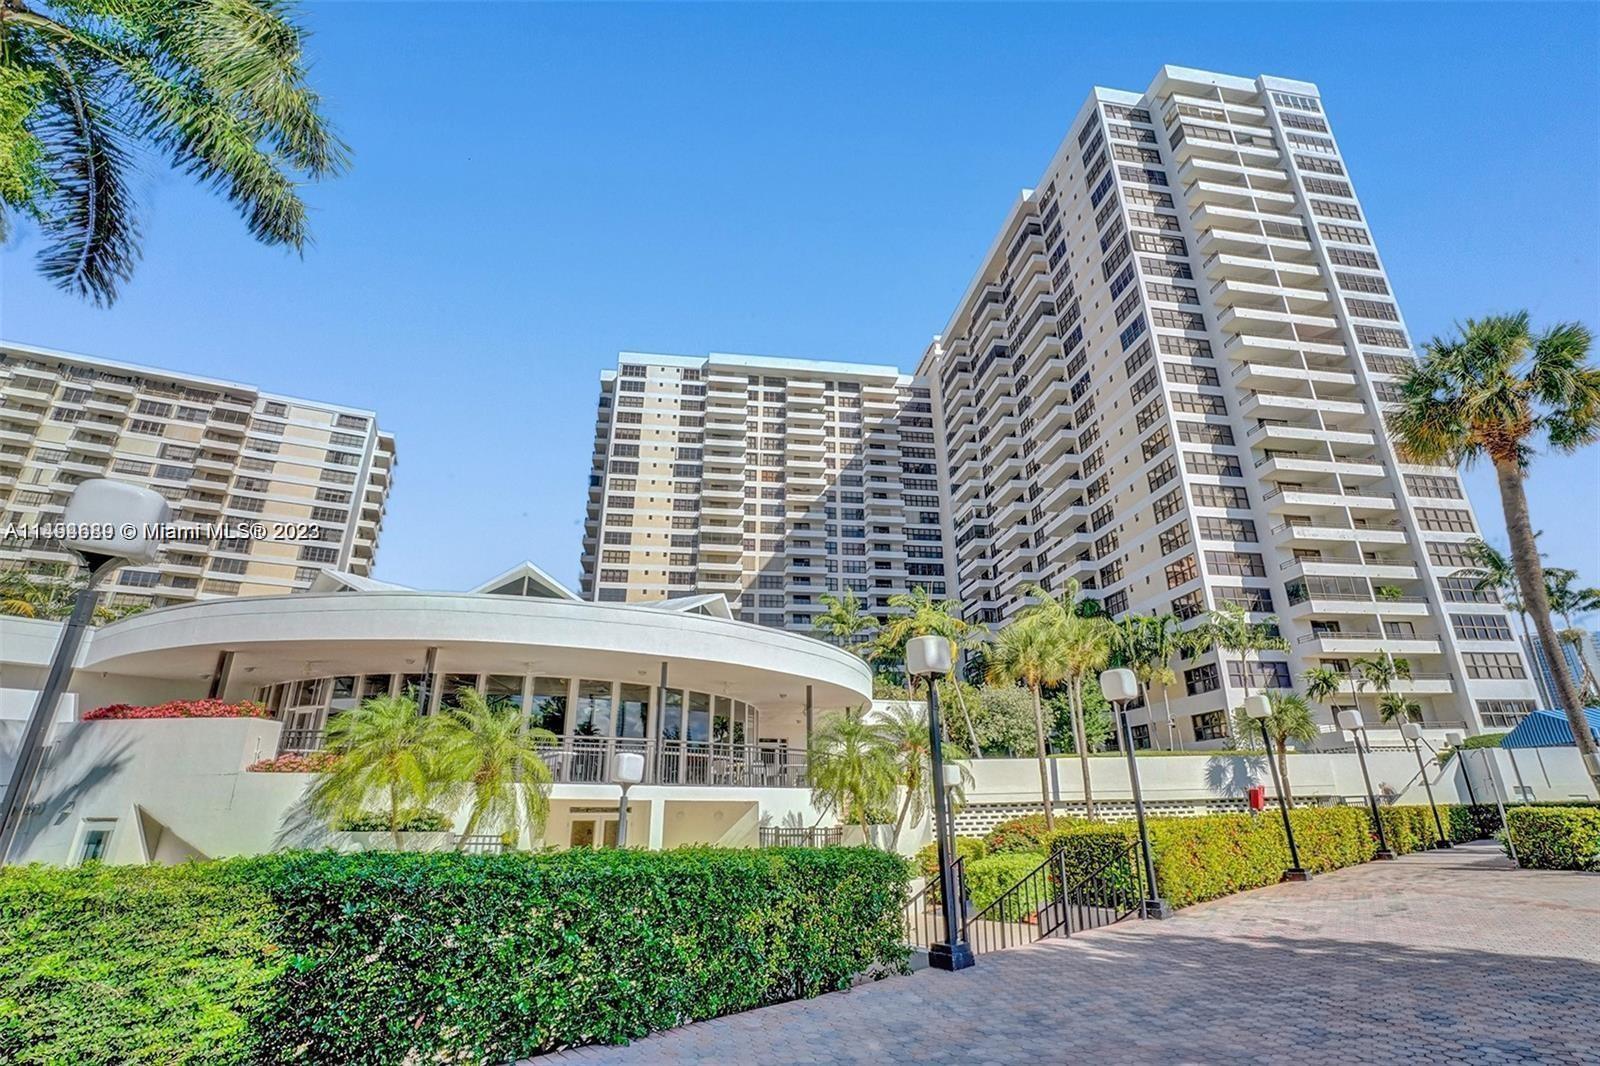 2/2 Corner unit at waterfront hi rise @ Three Island resort style with security .
Amenities: Pool, 